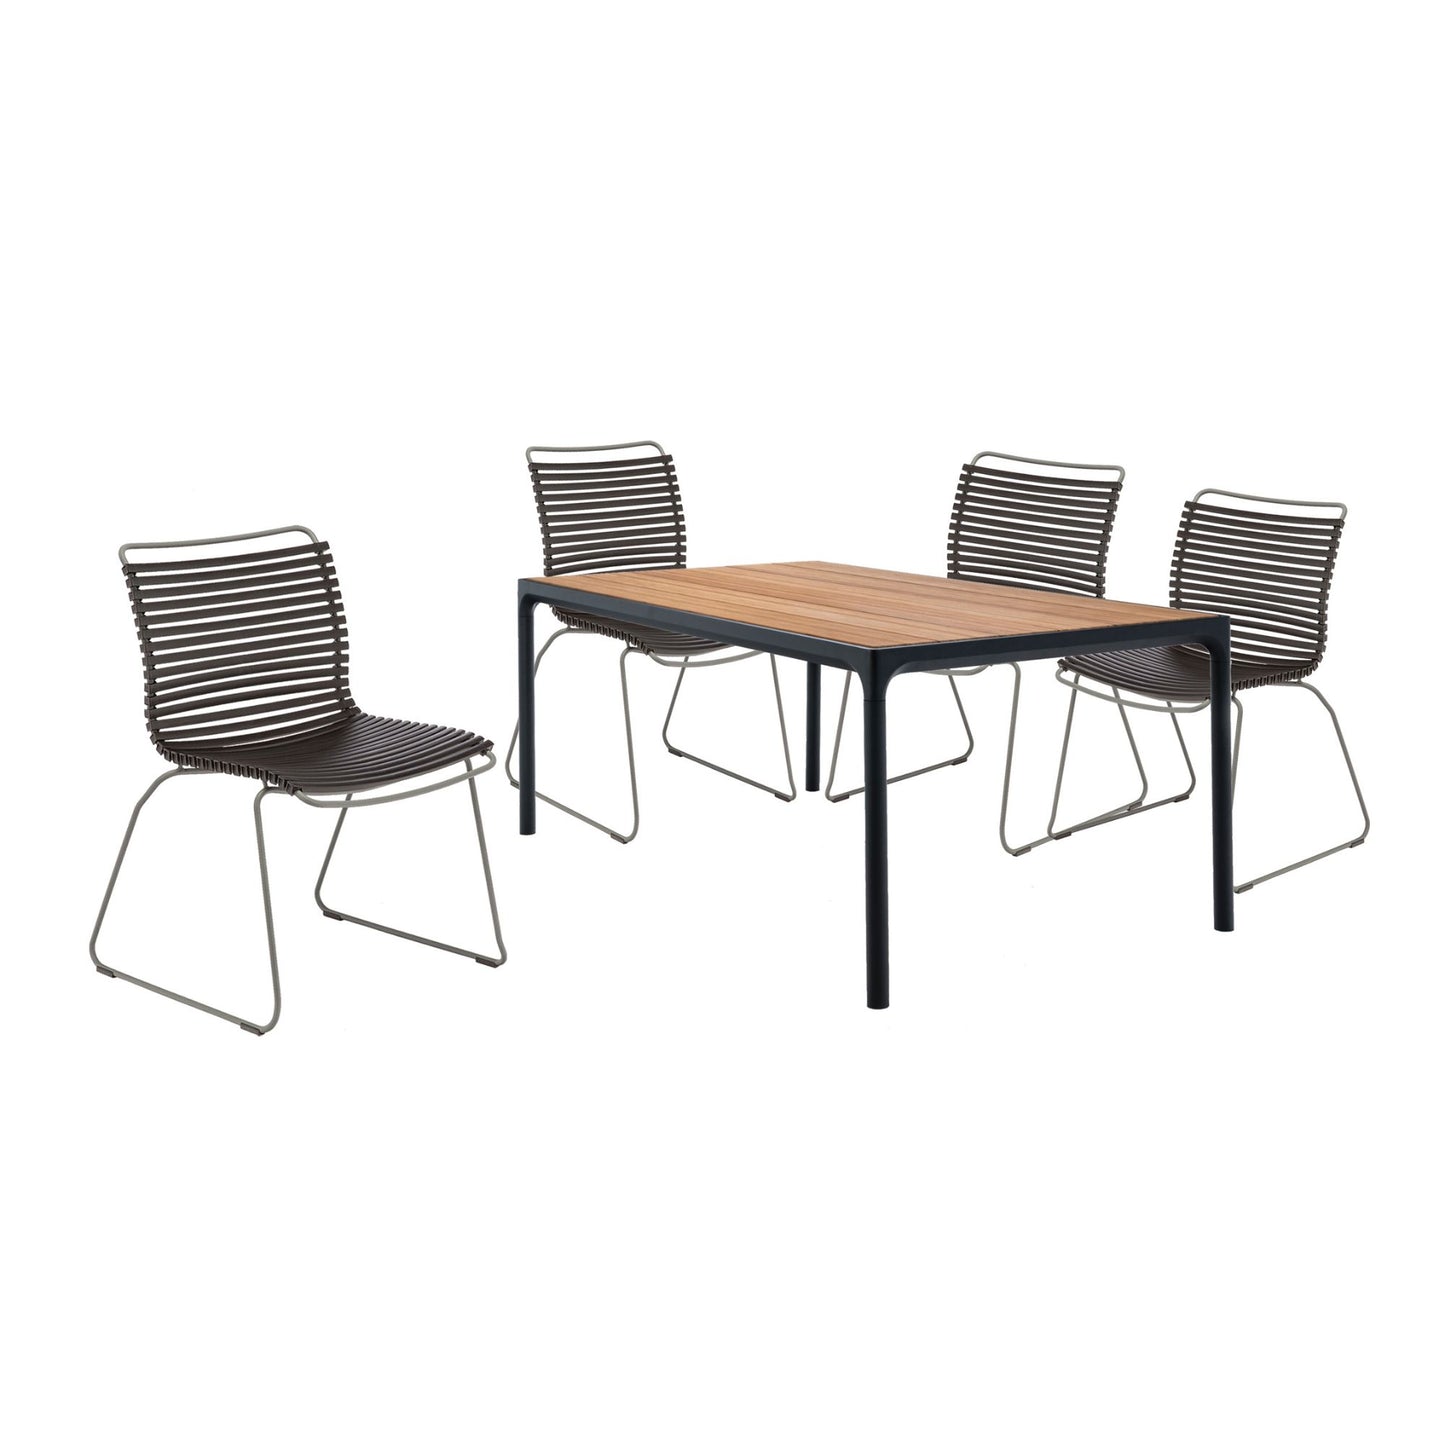 4 Seater Click & Four Outdoor Dining Set - Black